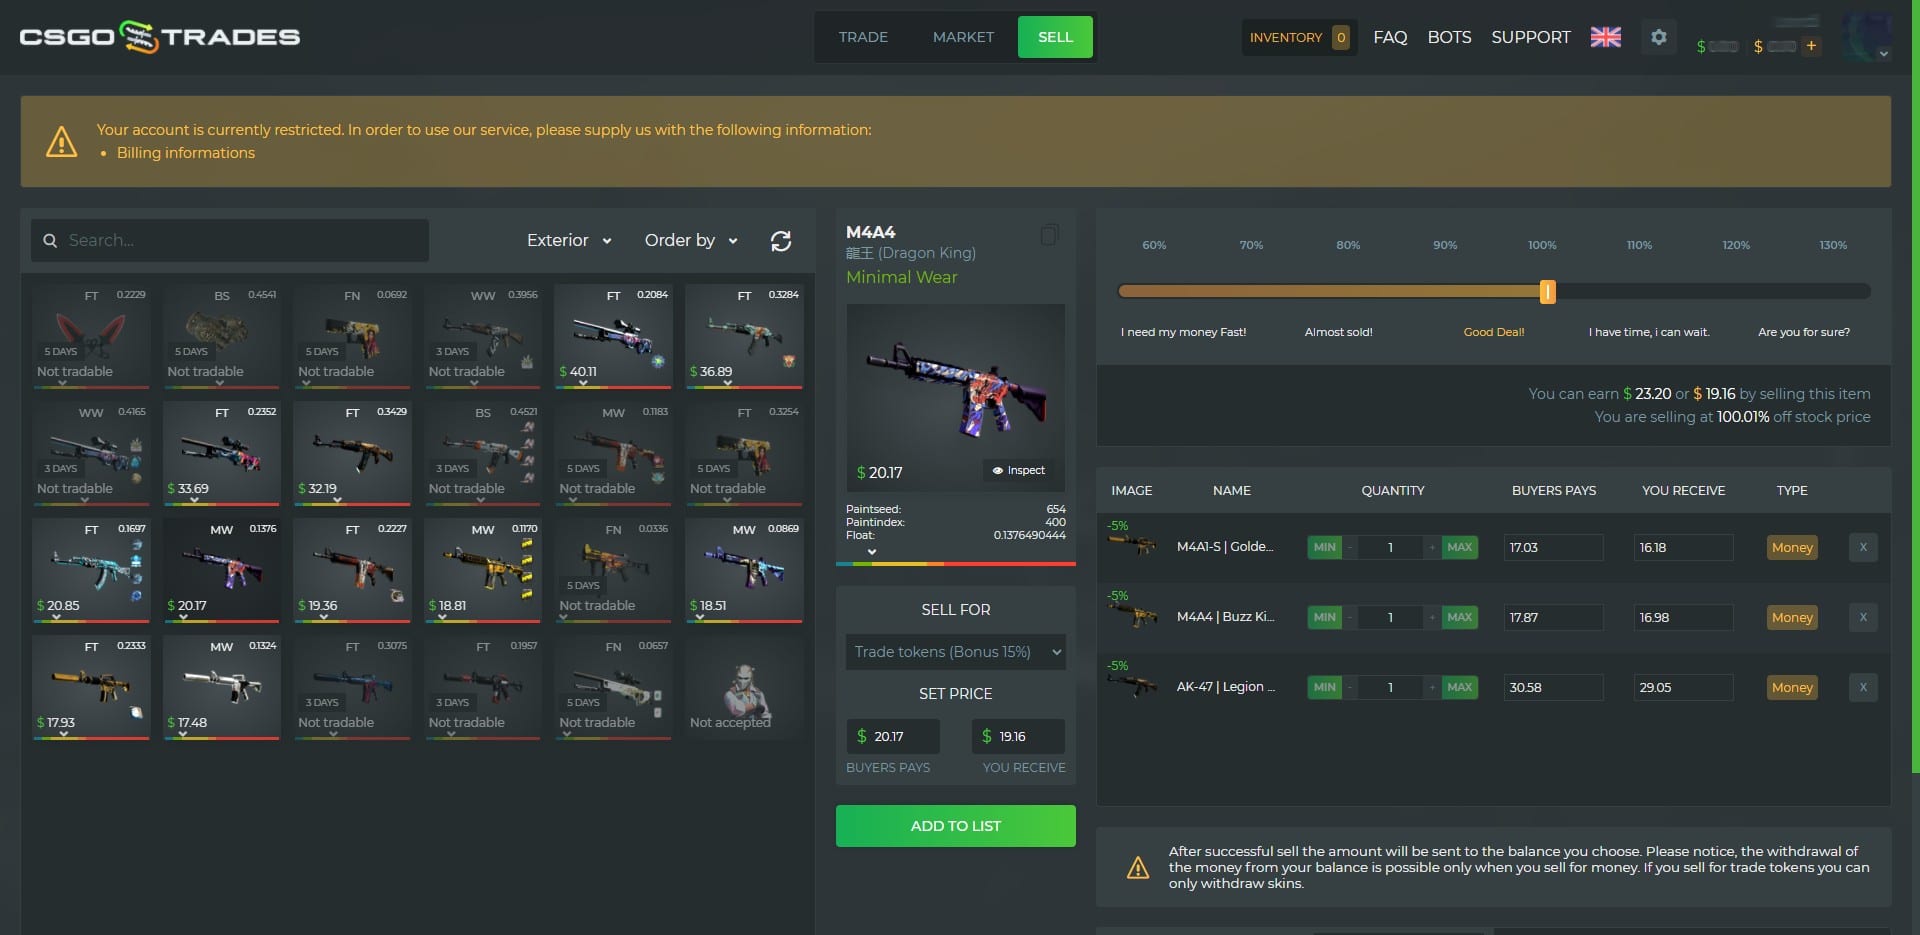 CSGOTrades Item Sell Page